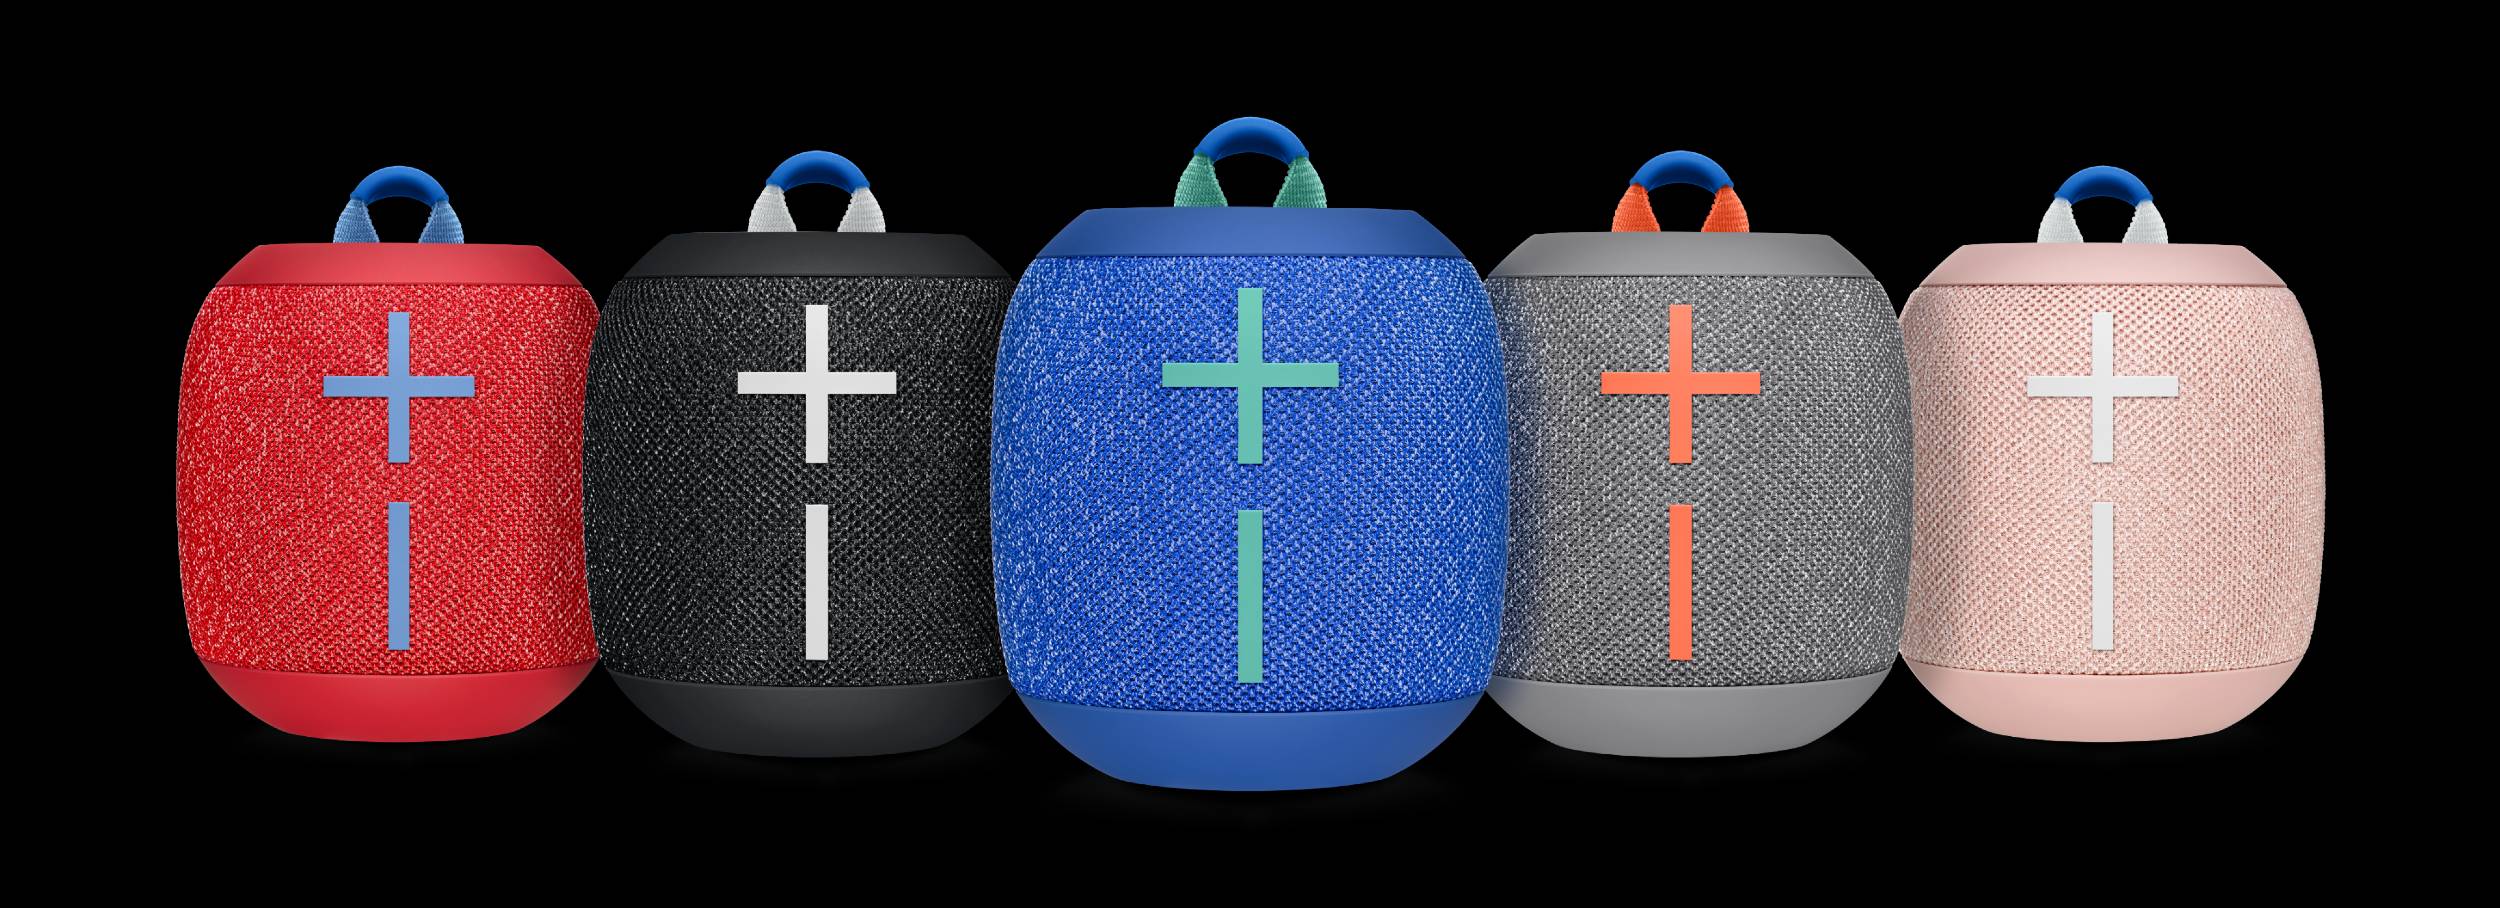 Each speaker comes in a stylish two-tone fabric, drawing Wonderboom 2 comes in five colors: Deep Space Black, Crushed Ice (gray), Radical Red, Bermuda Blue and Just Peach (pink).